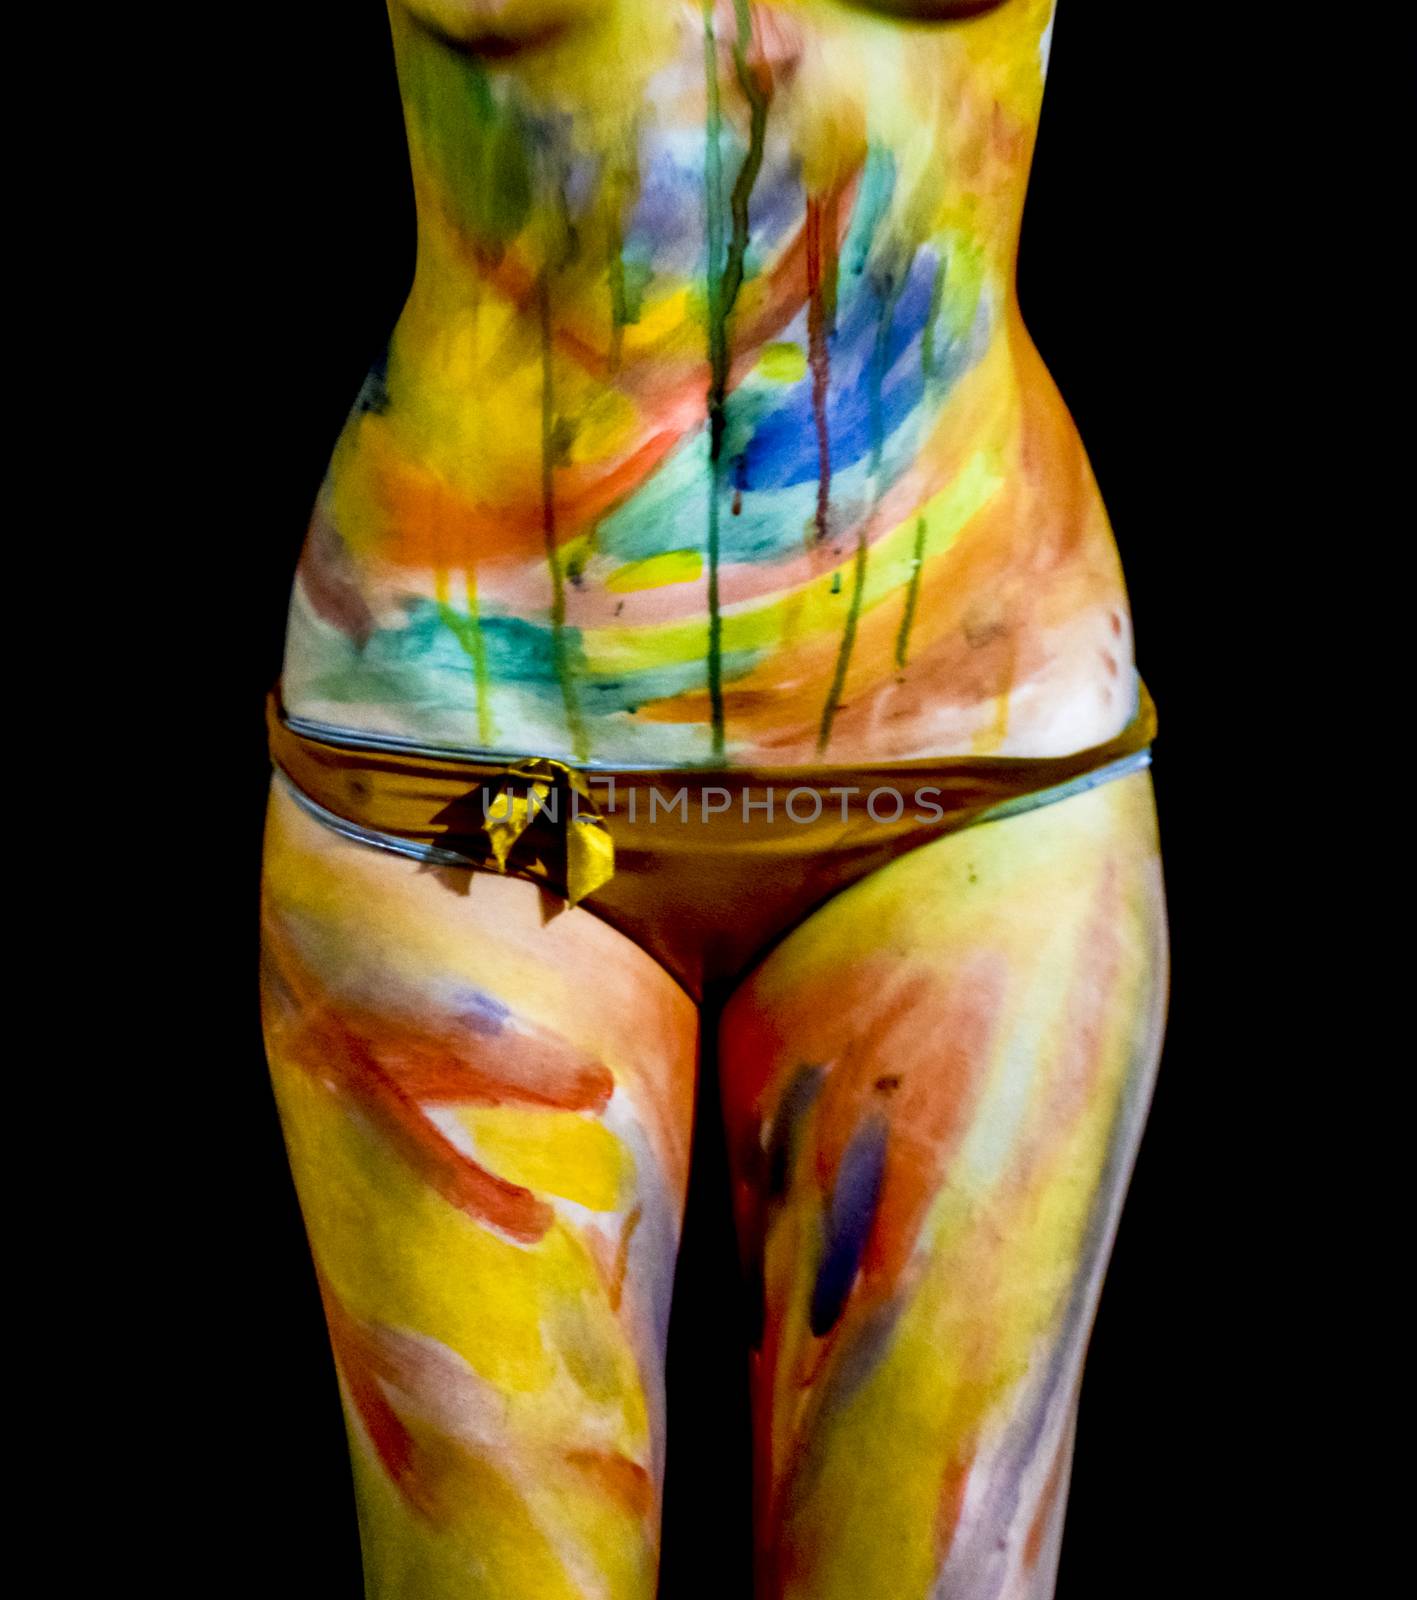 Body art. Drawing on the body. Beautiful girl with painted body watercolors. A white young girl painted the body with paint by eleonimages